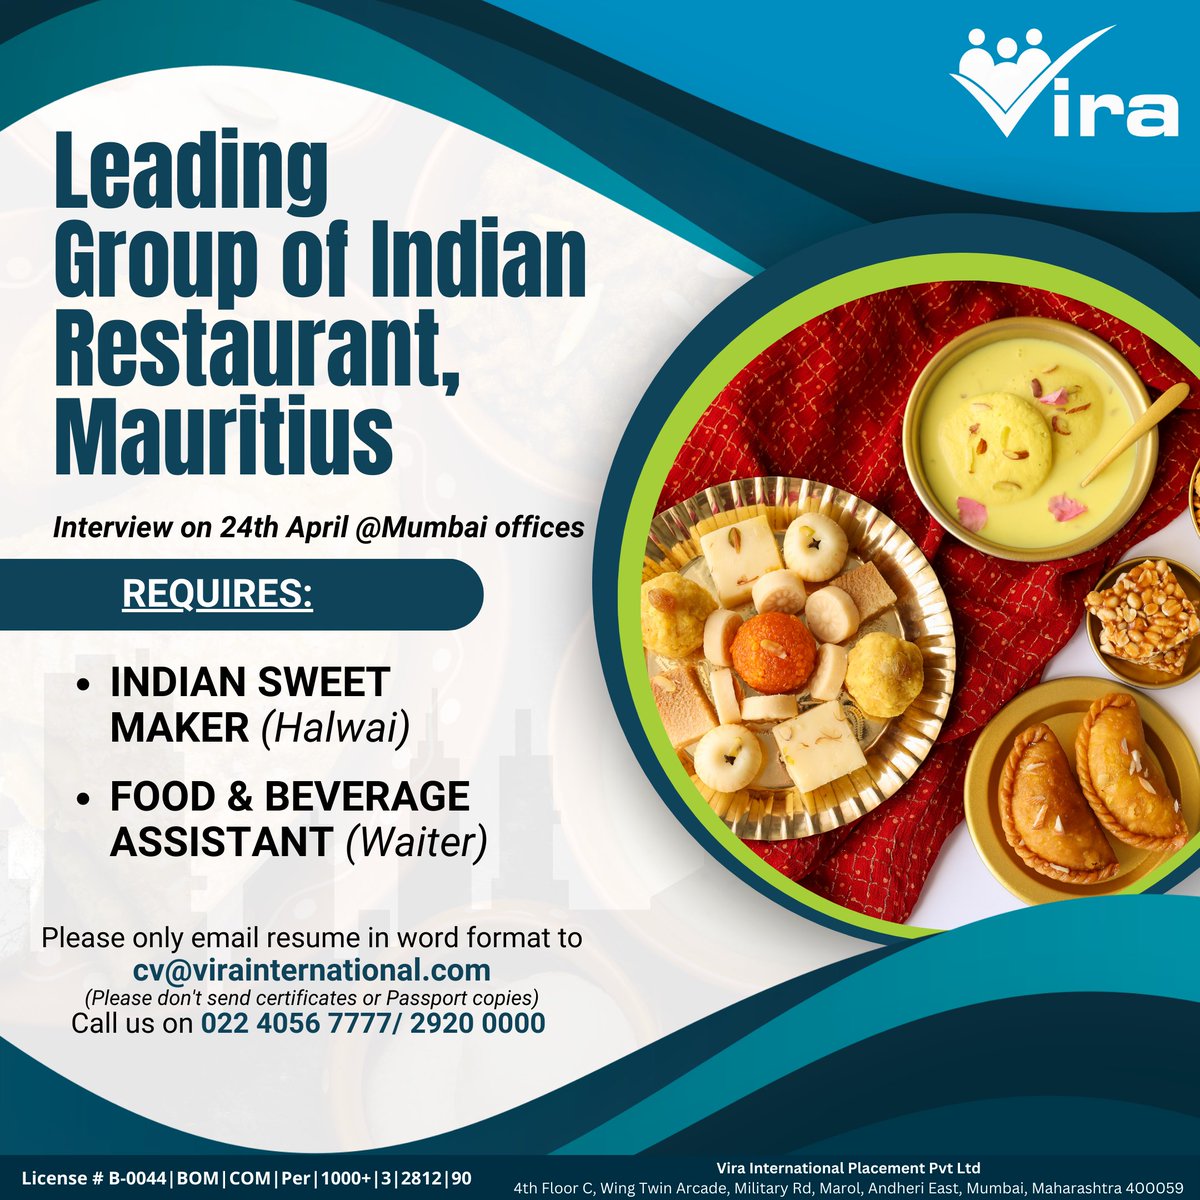 Leading Group of Indian Restaurant, Mauritius!!

Interview on 24th April @Mumbai offices

Requires:
INDIAN SWEET MAKER (Halwai)
FOOD & BEVERAGE ASSISTANT (Waiter)

#Vira #Hospitality #Mauritius #Halwai #IndianSweets #FNBassistant #Waiters #Restaurant #Indianfood #ApplyNow